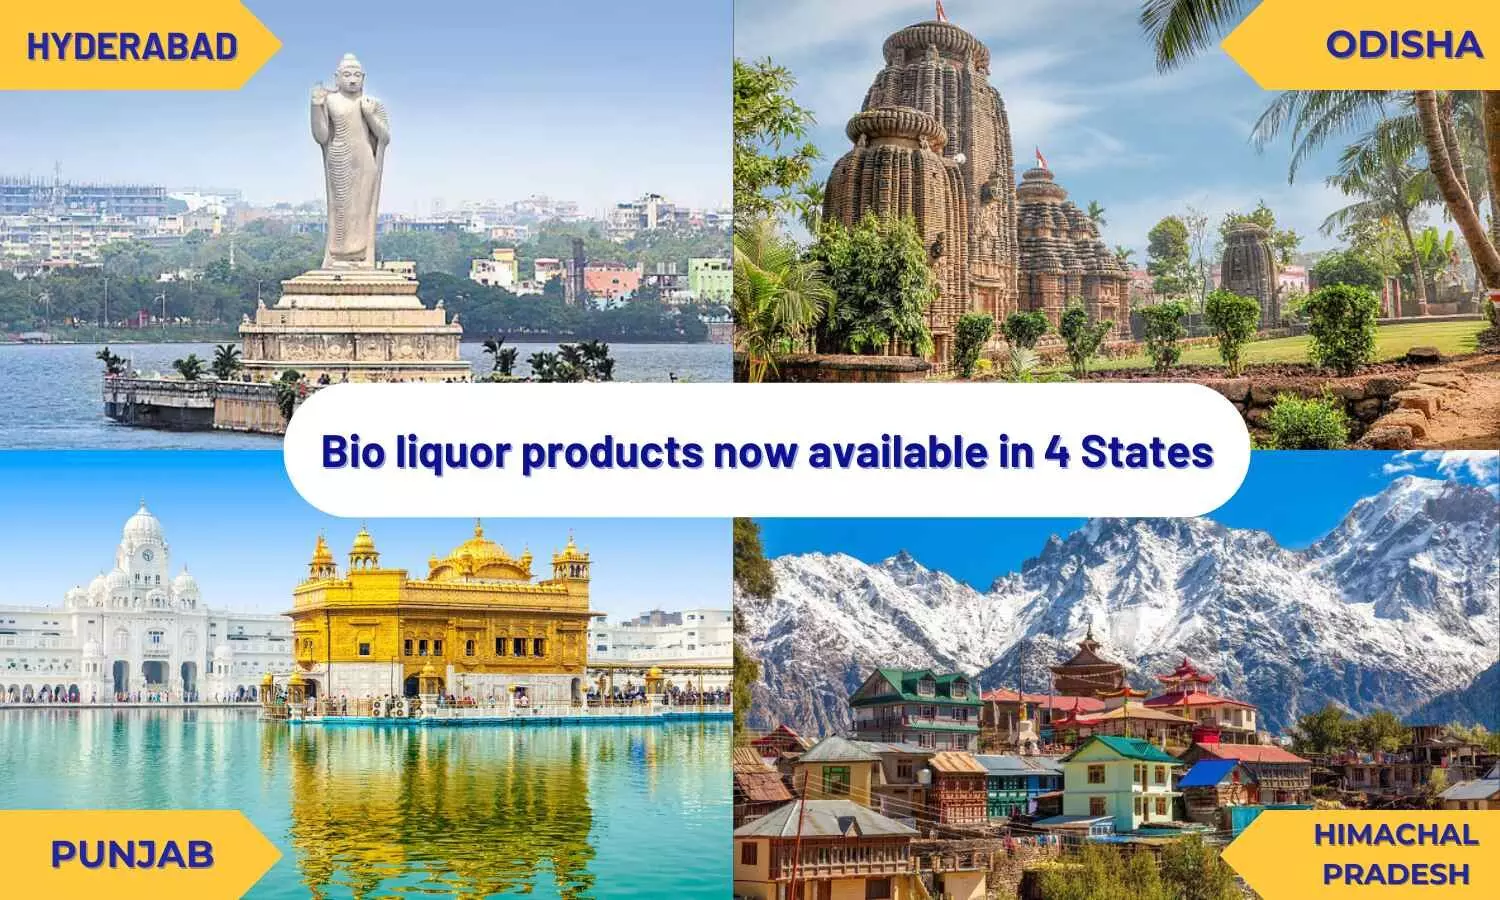 Bio liquor products now available in 4 States